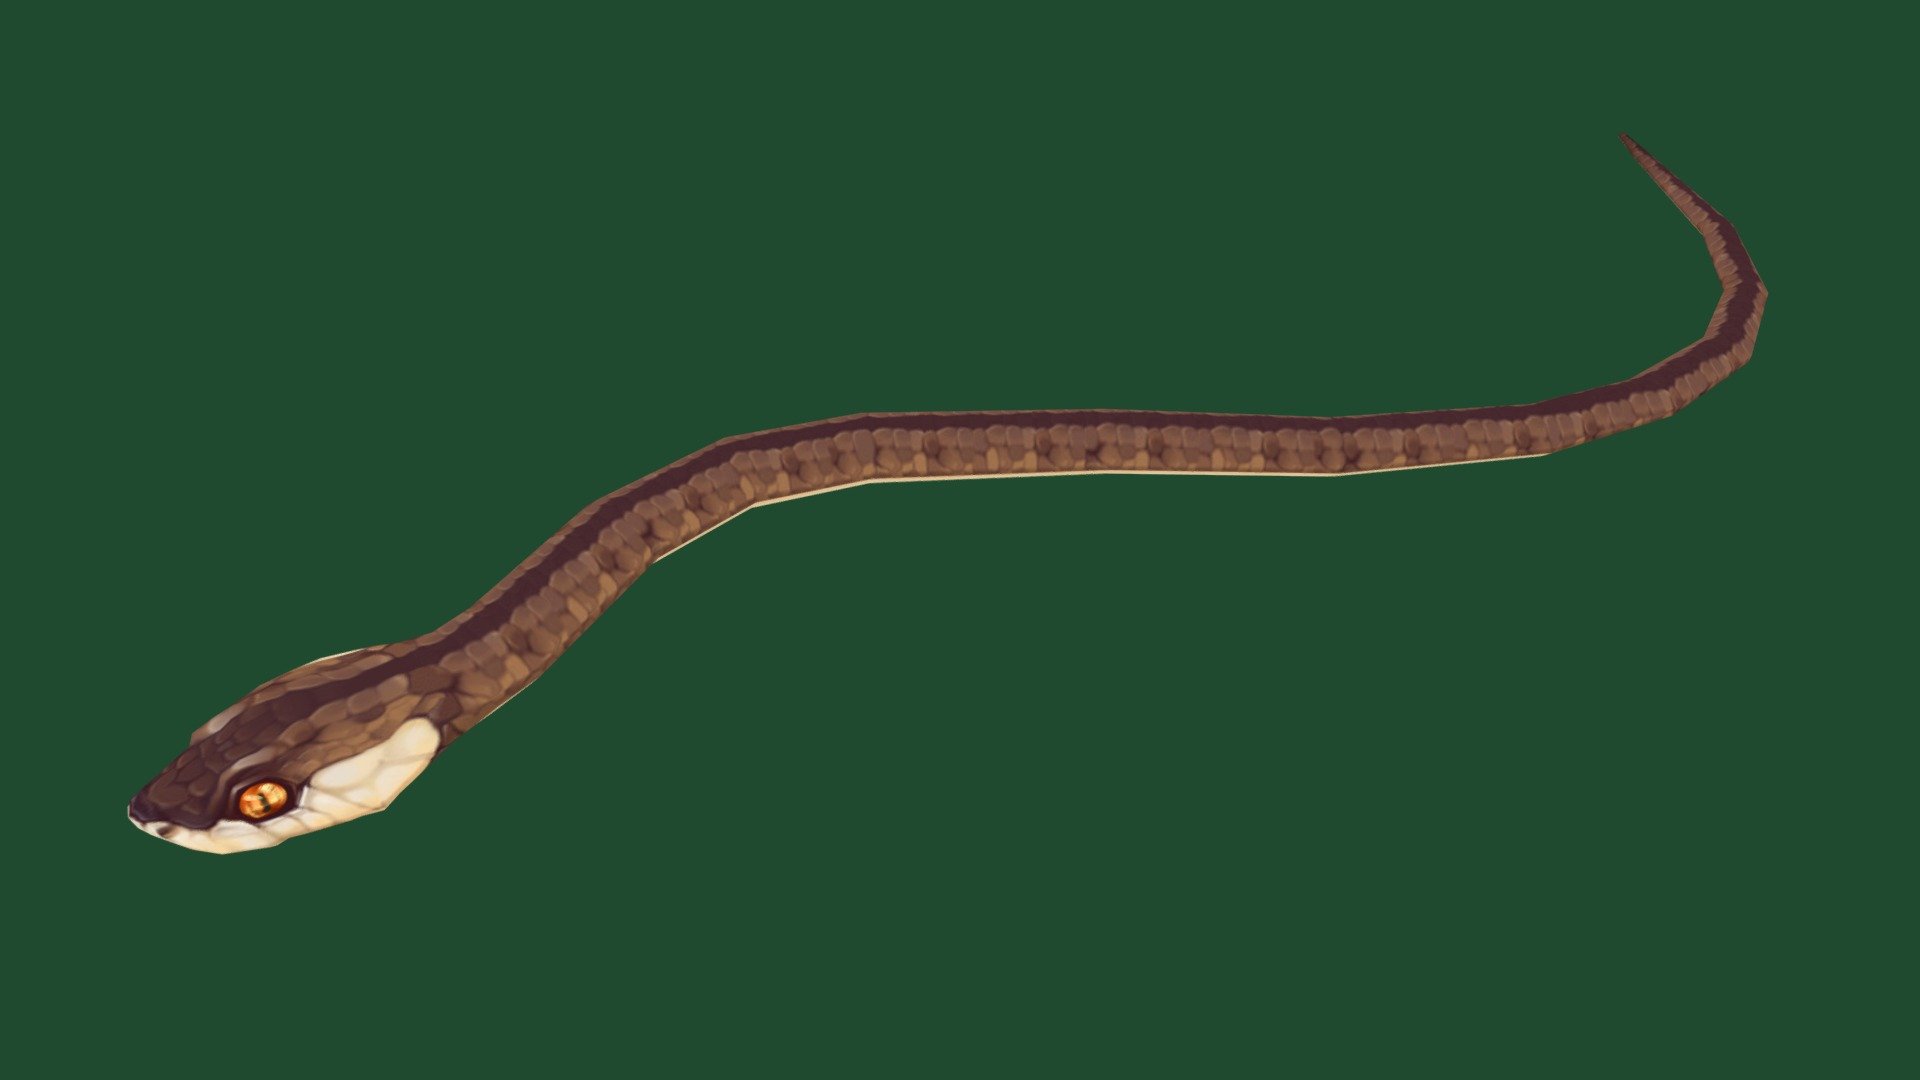 The Snake is 768 Poly and on a 512 x 512 diffuse map 3d model